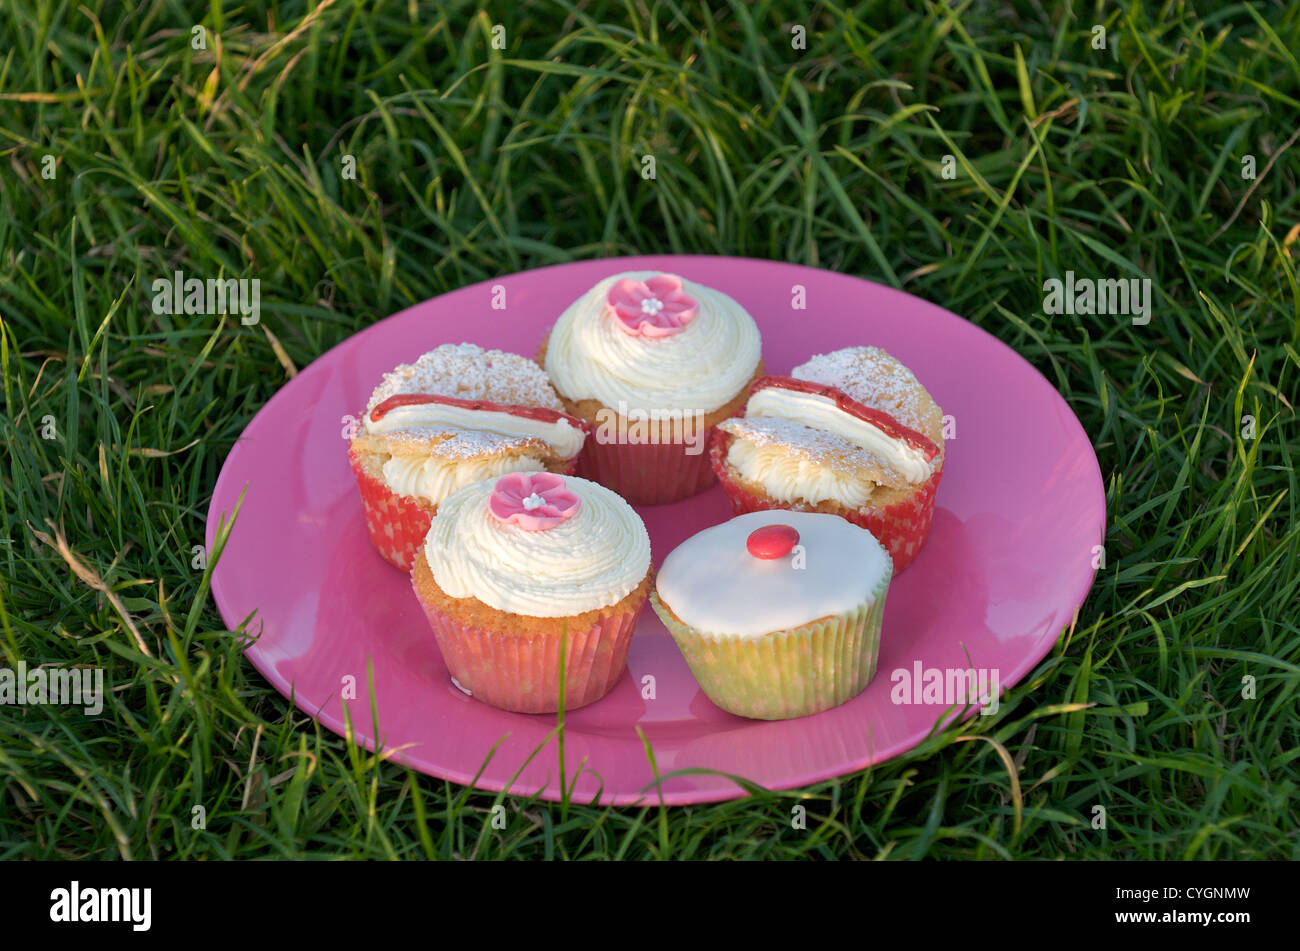 Plate of cupcakes Banque D'Images